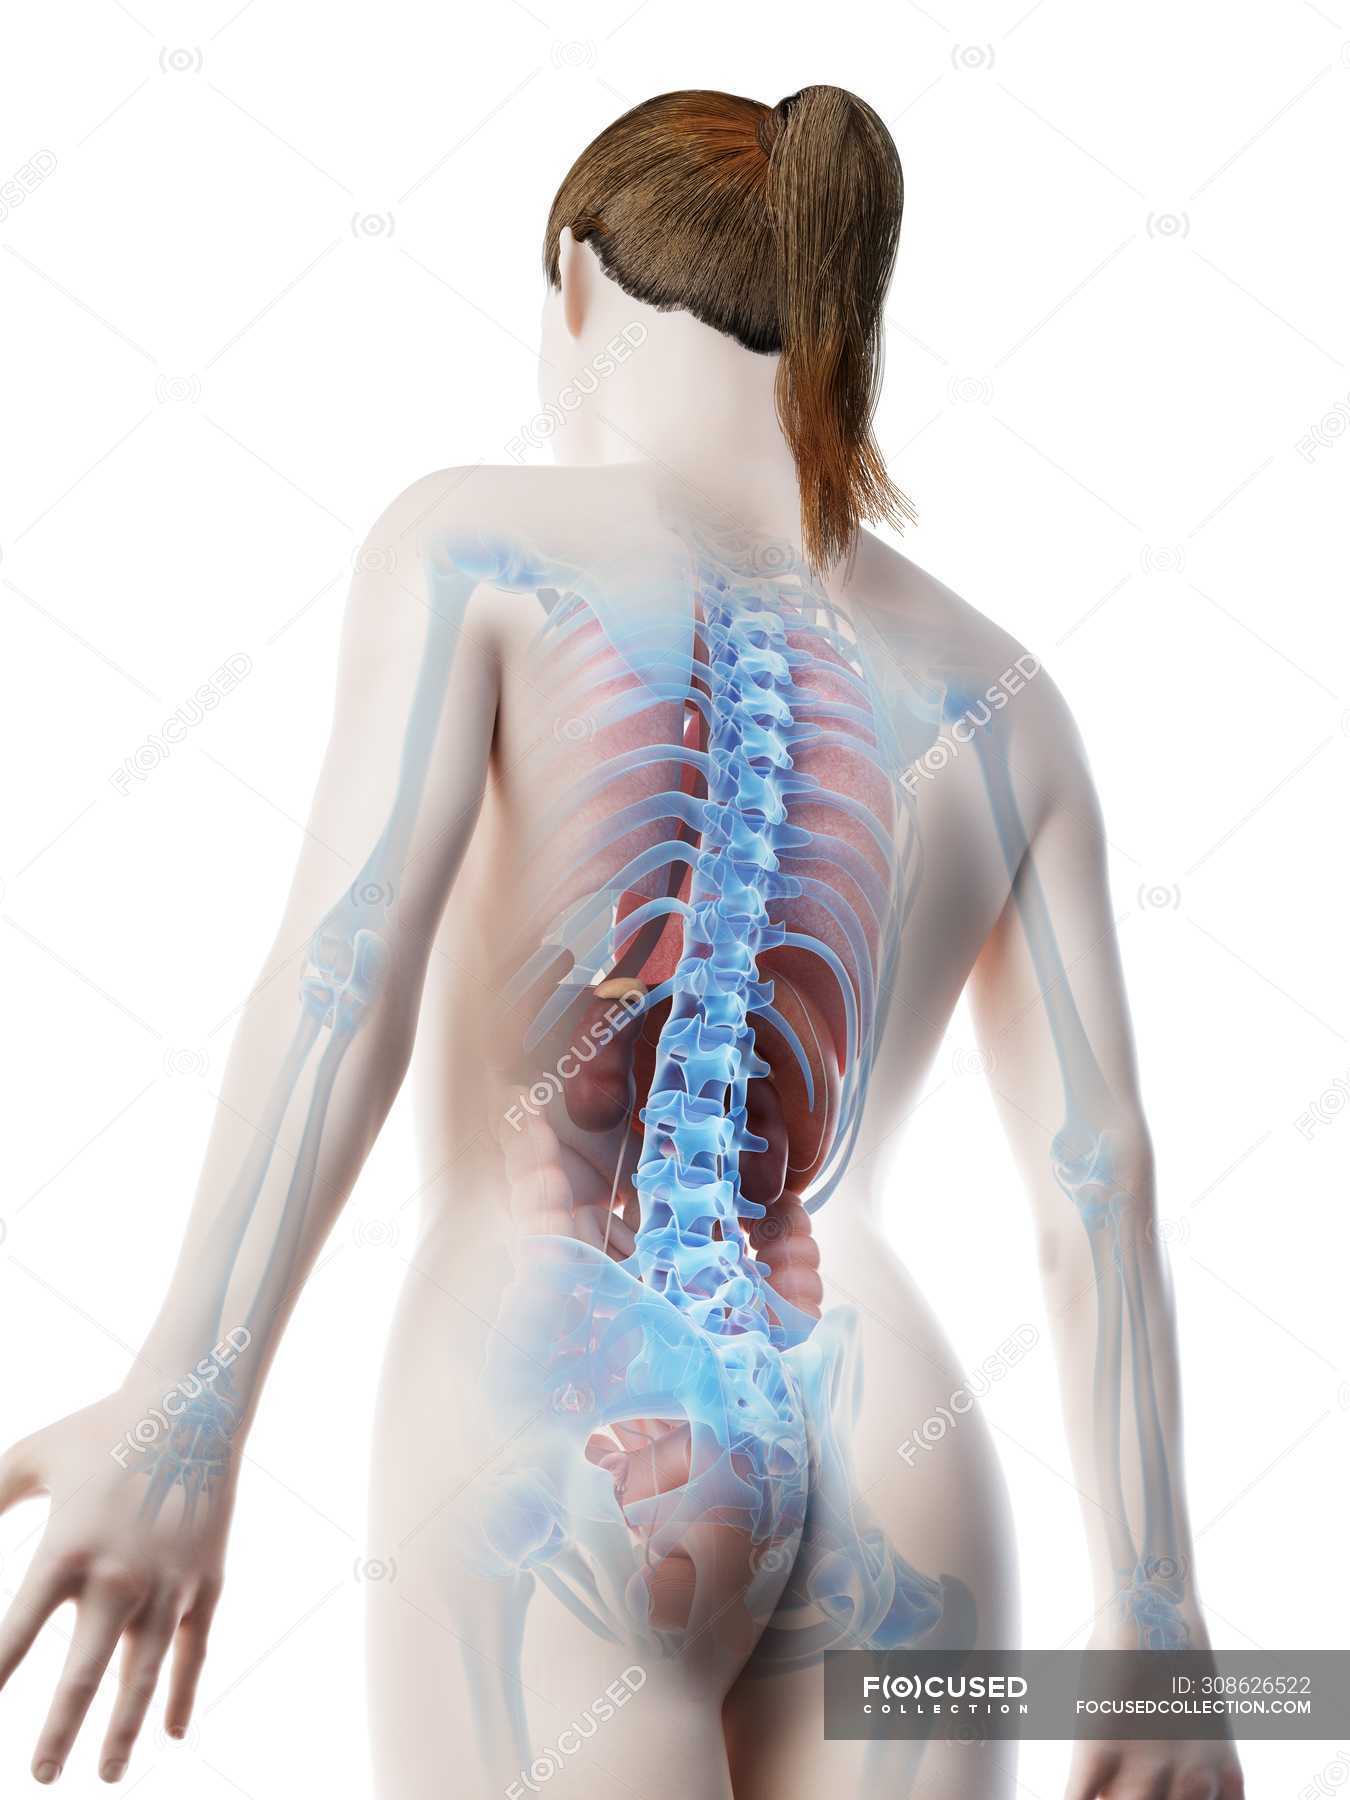 Human Body Model Showing Female Anatomy With Internal Organs In Rear View Digital 3d Render Illustration Guts Science Stock Photo 308626522